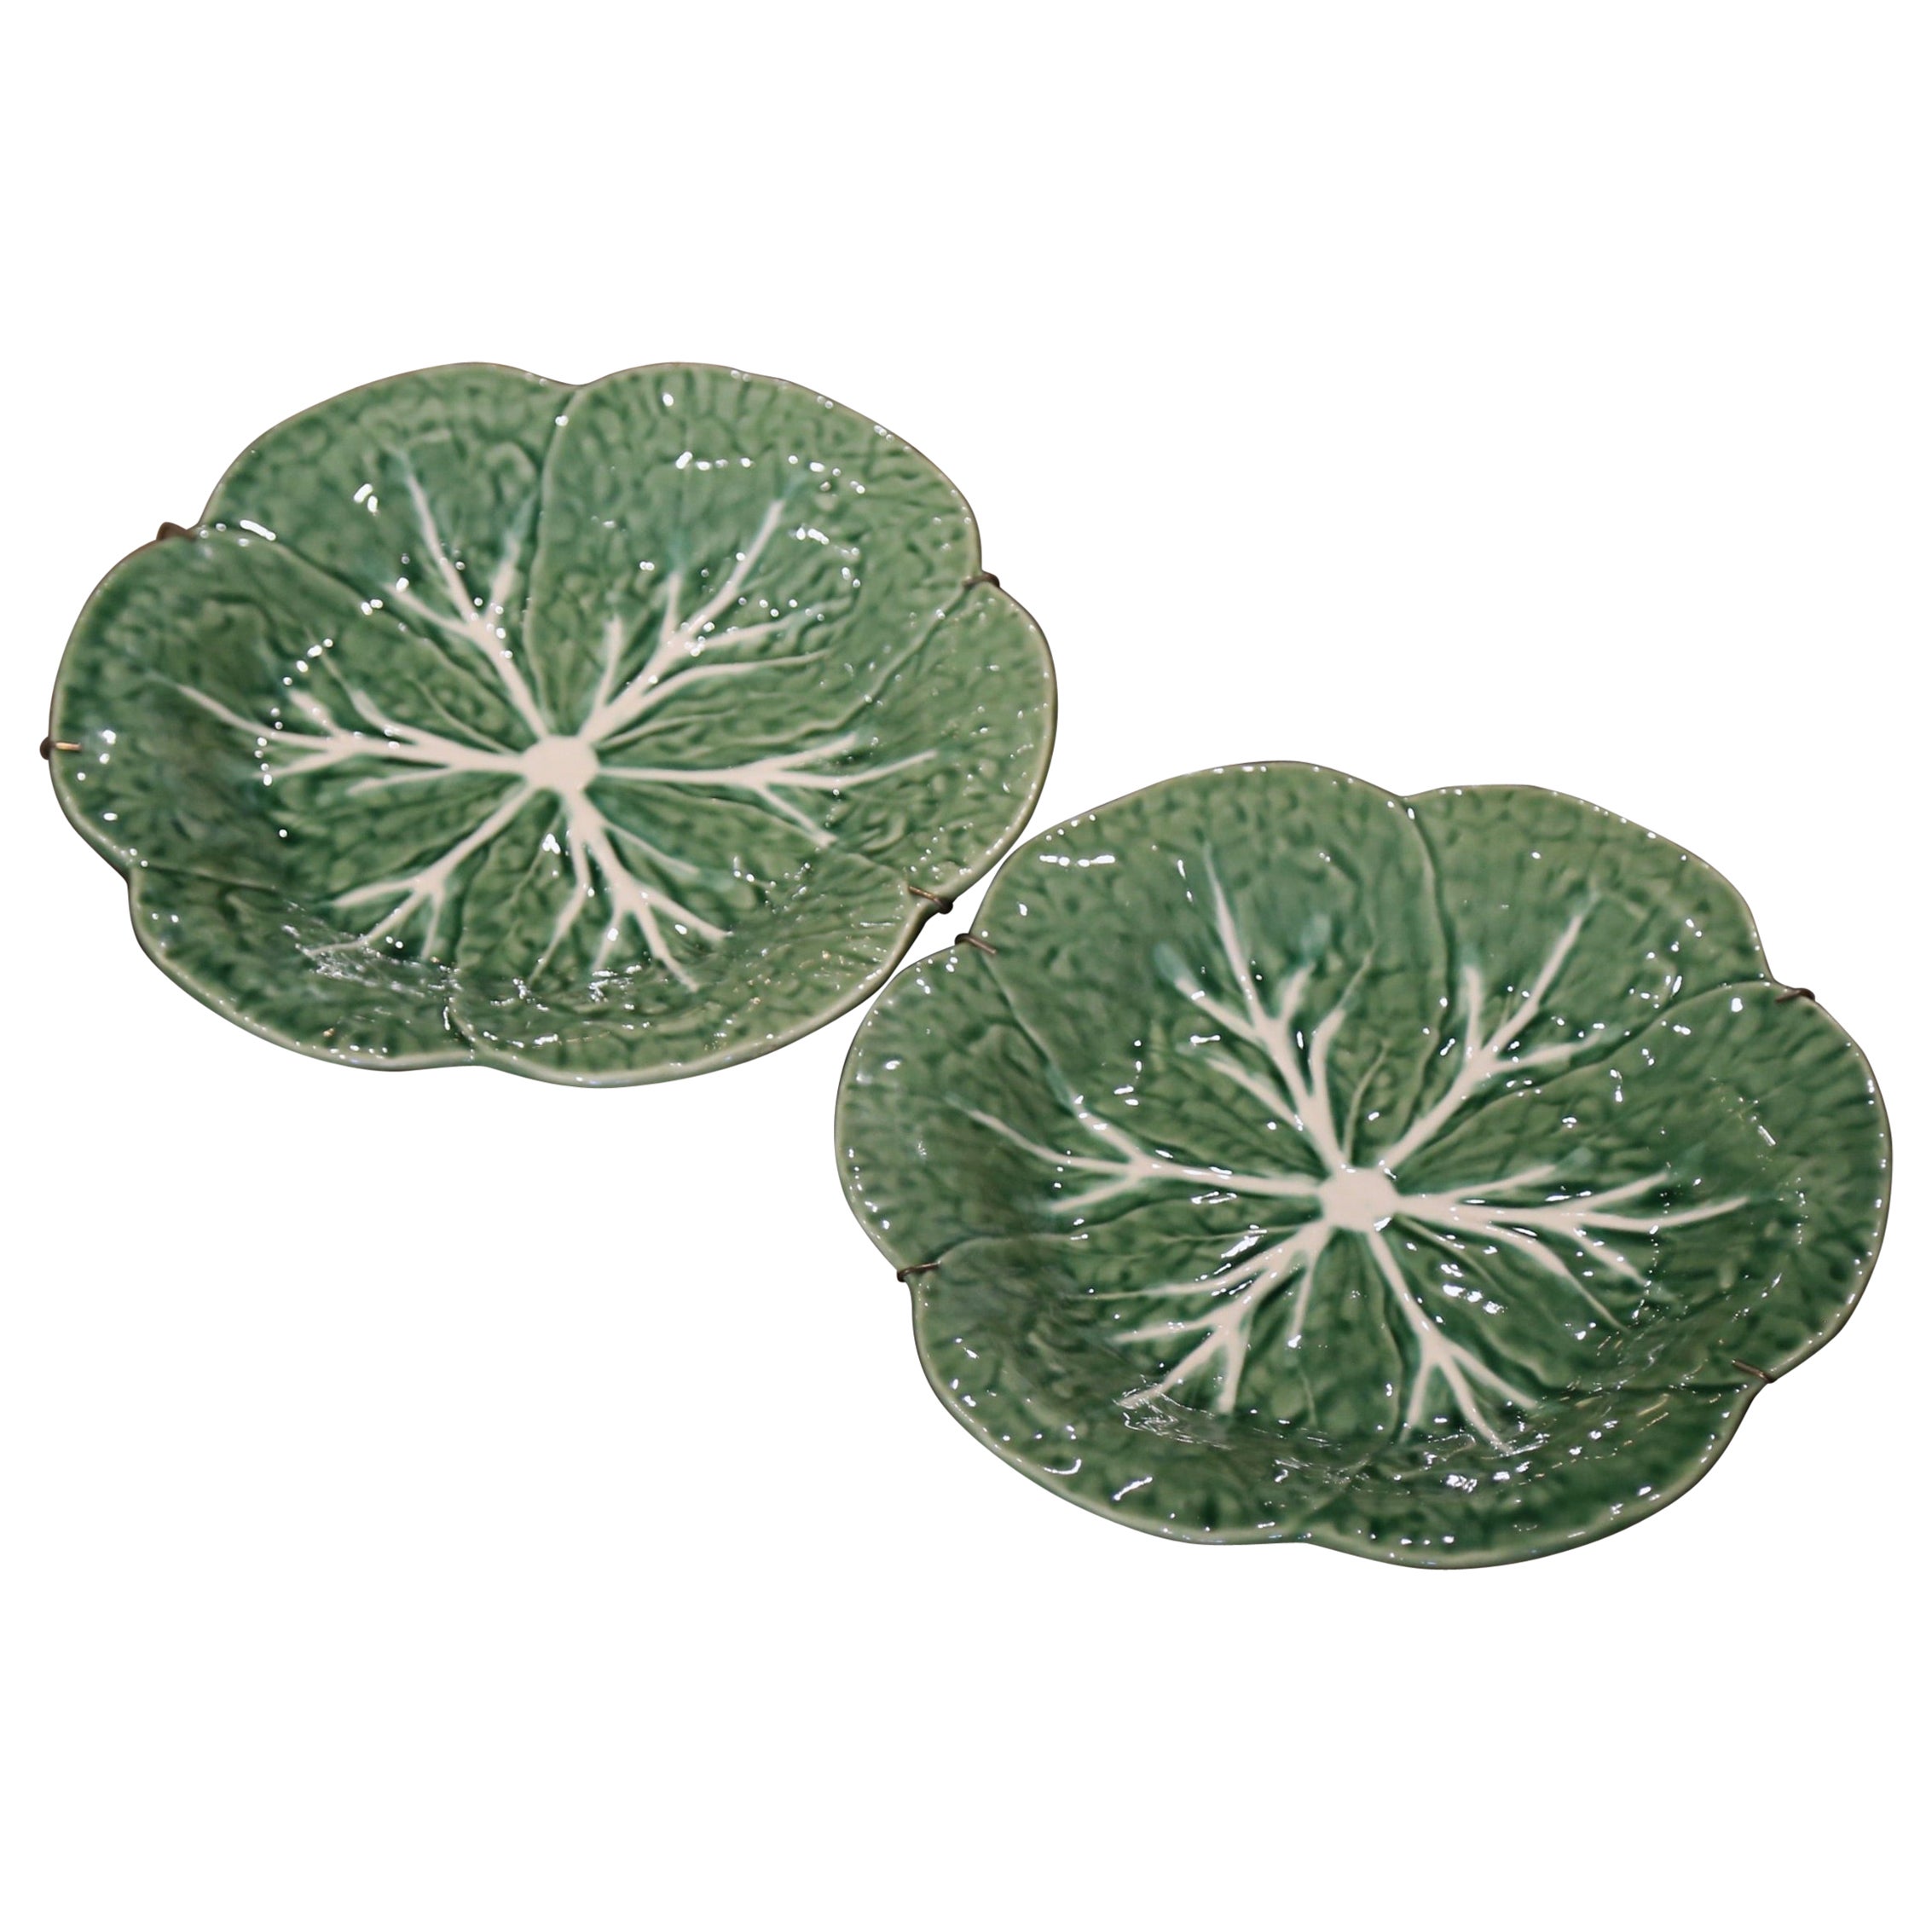 Pair of Vintage Portuguese Bordallo Pinheiro Decorative Cabbage Wall Platters For Sale